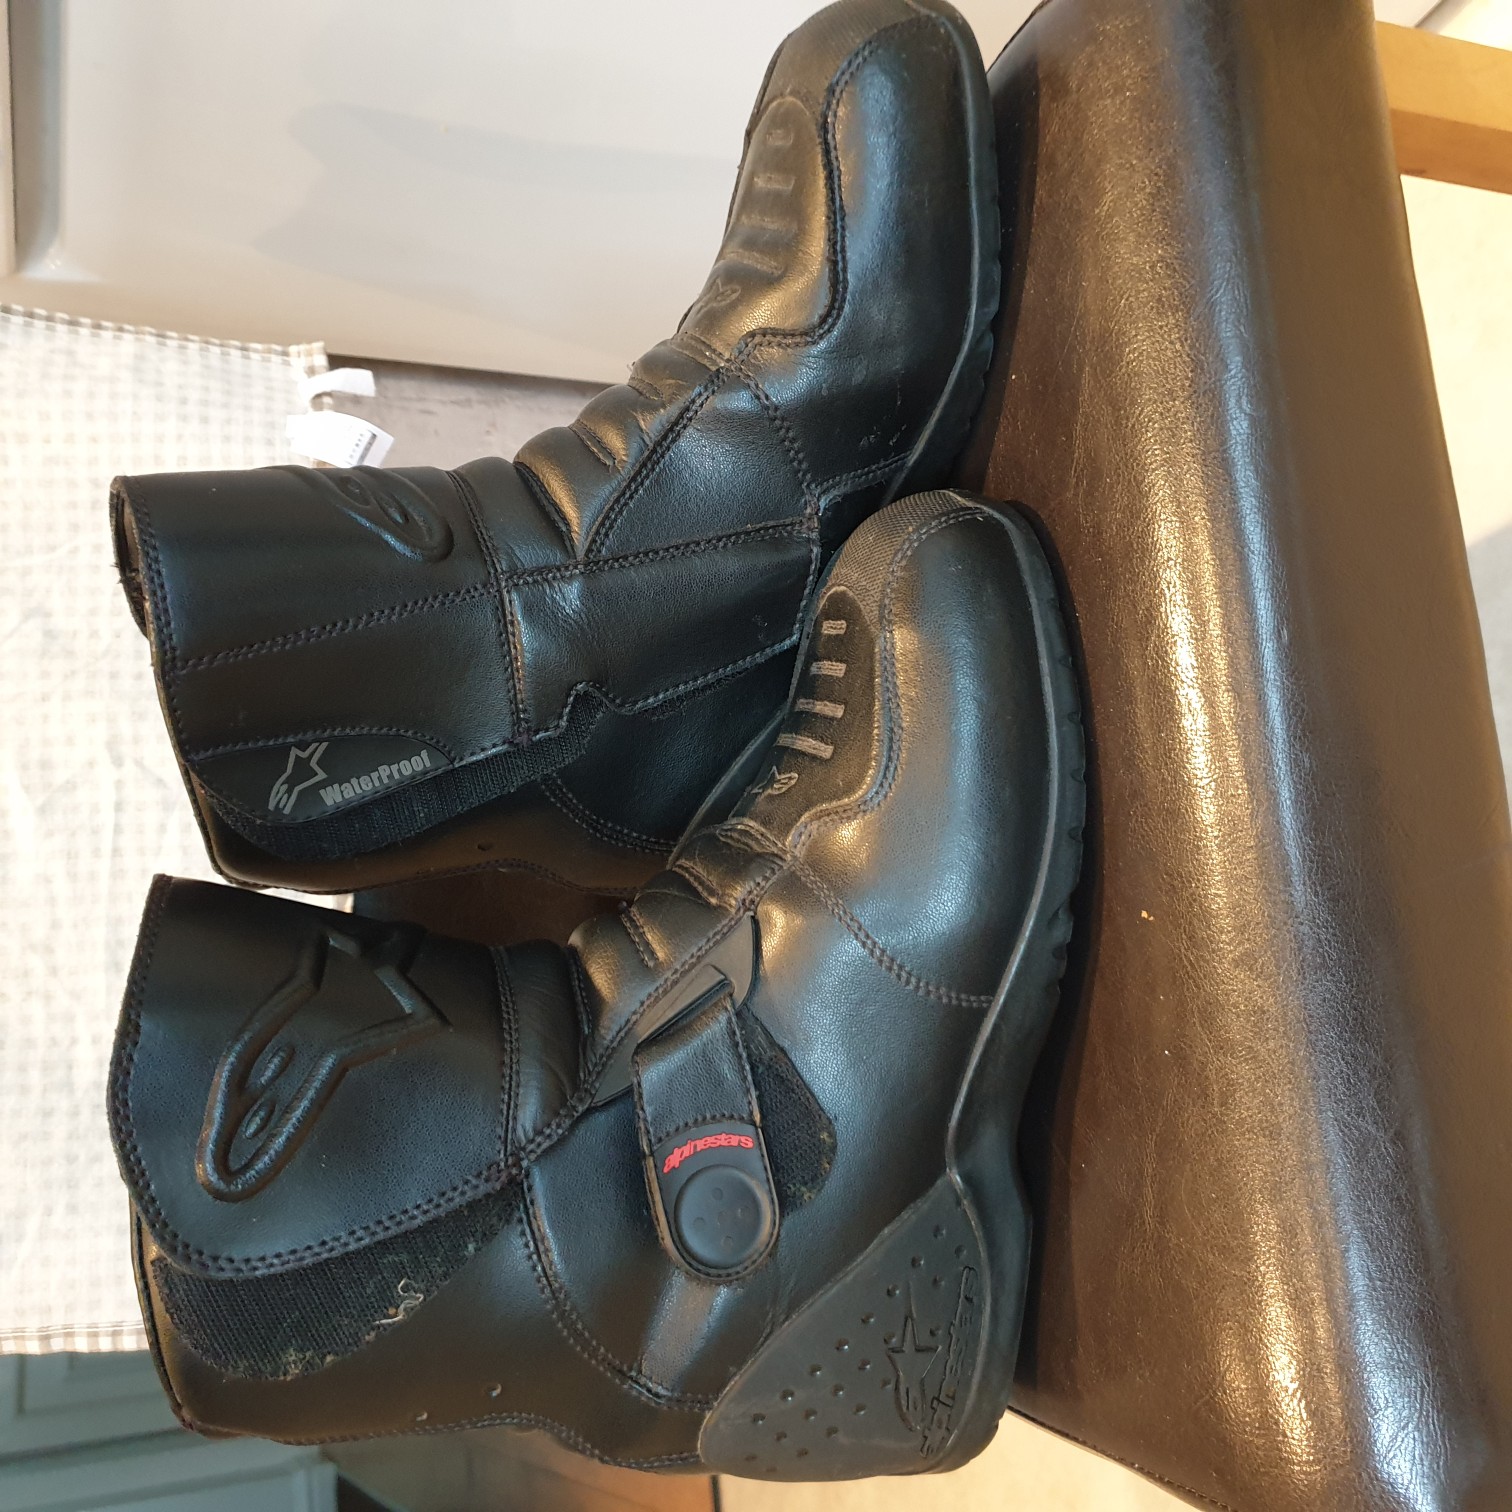 motorbike boots for sale